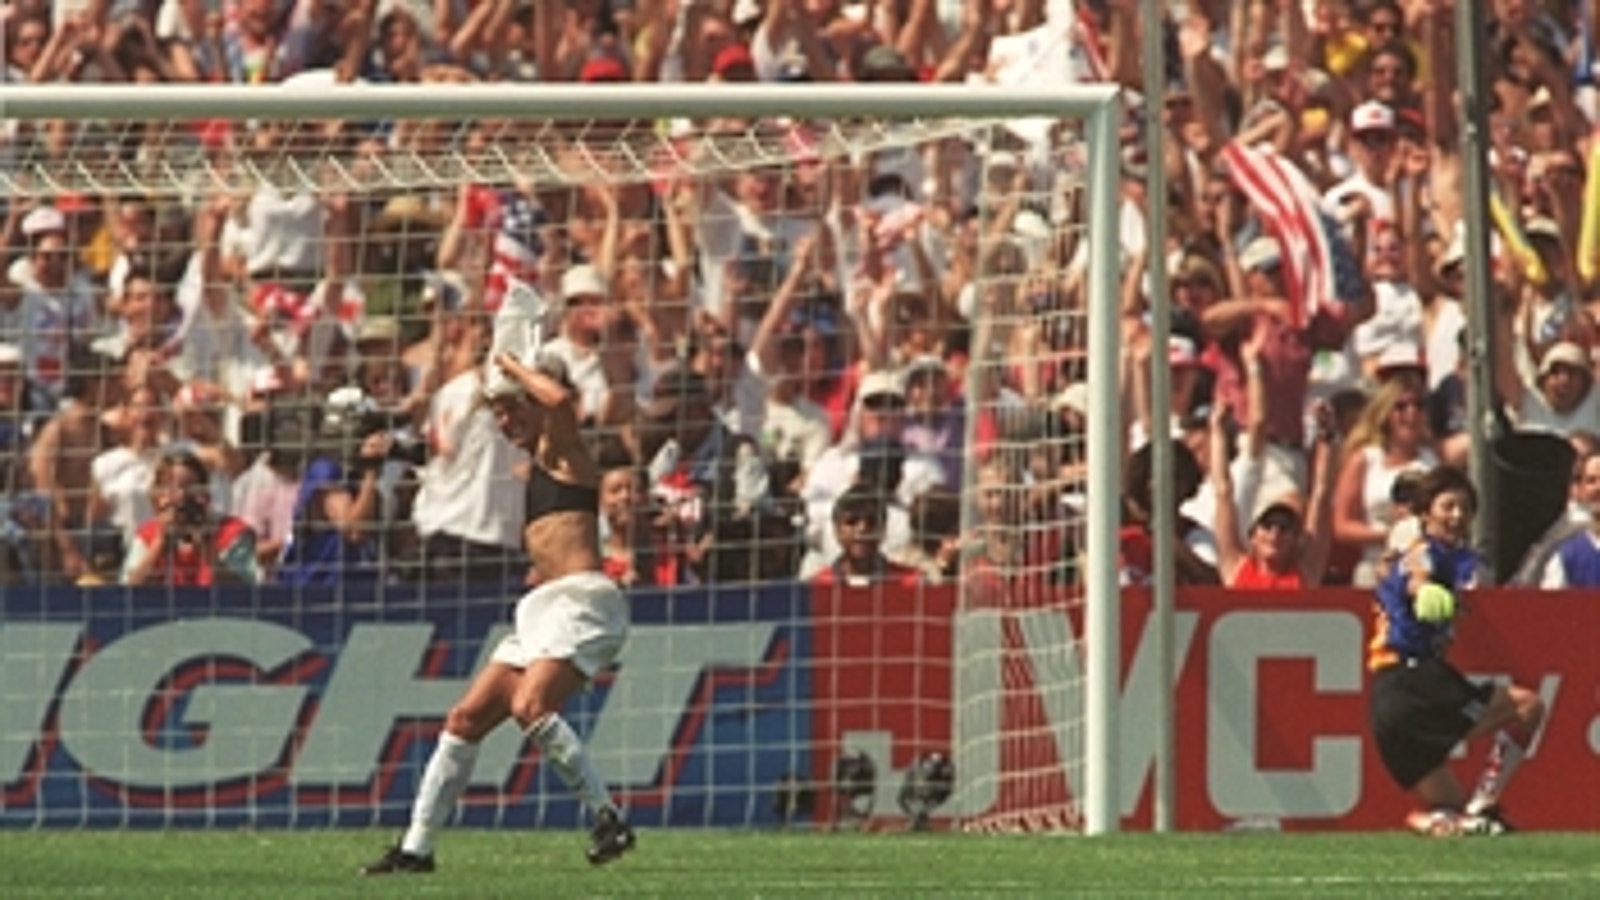 Brandi Chastain's iconic World Cup moment